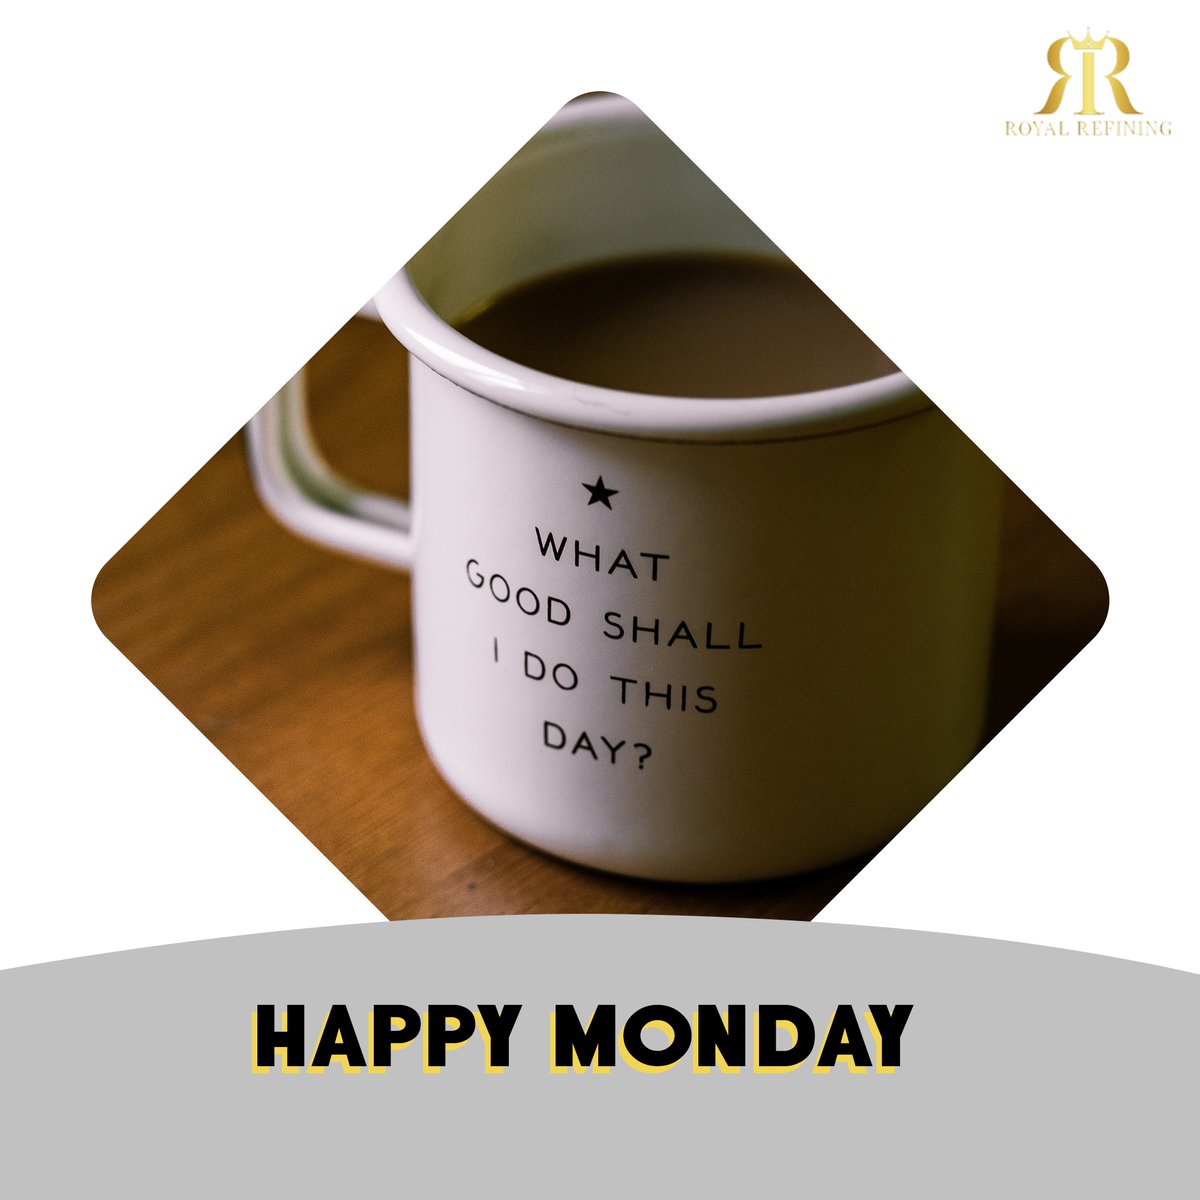 Mondays are not always easy, but we can still make the most of them!

If you have any dental scrap call us today and we promise to pay more for them than other refiners!

📞 833-766-1400

#CashForGold #Dental #PreciousMetal #DentalPractice #DentalCare #Monday